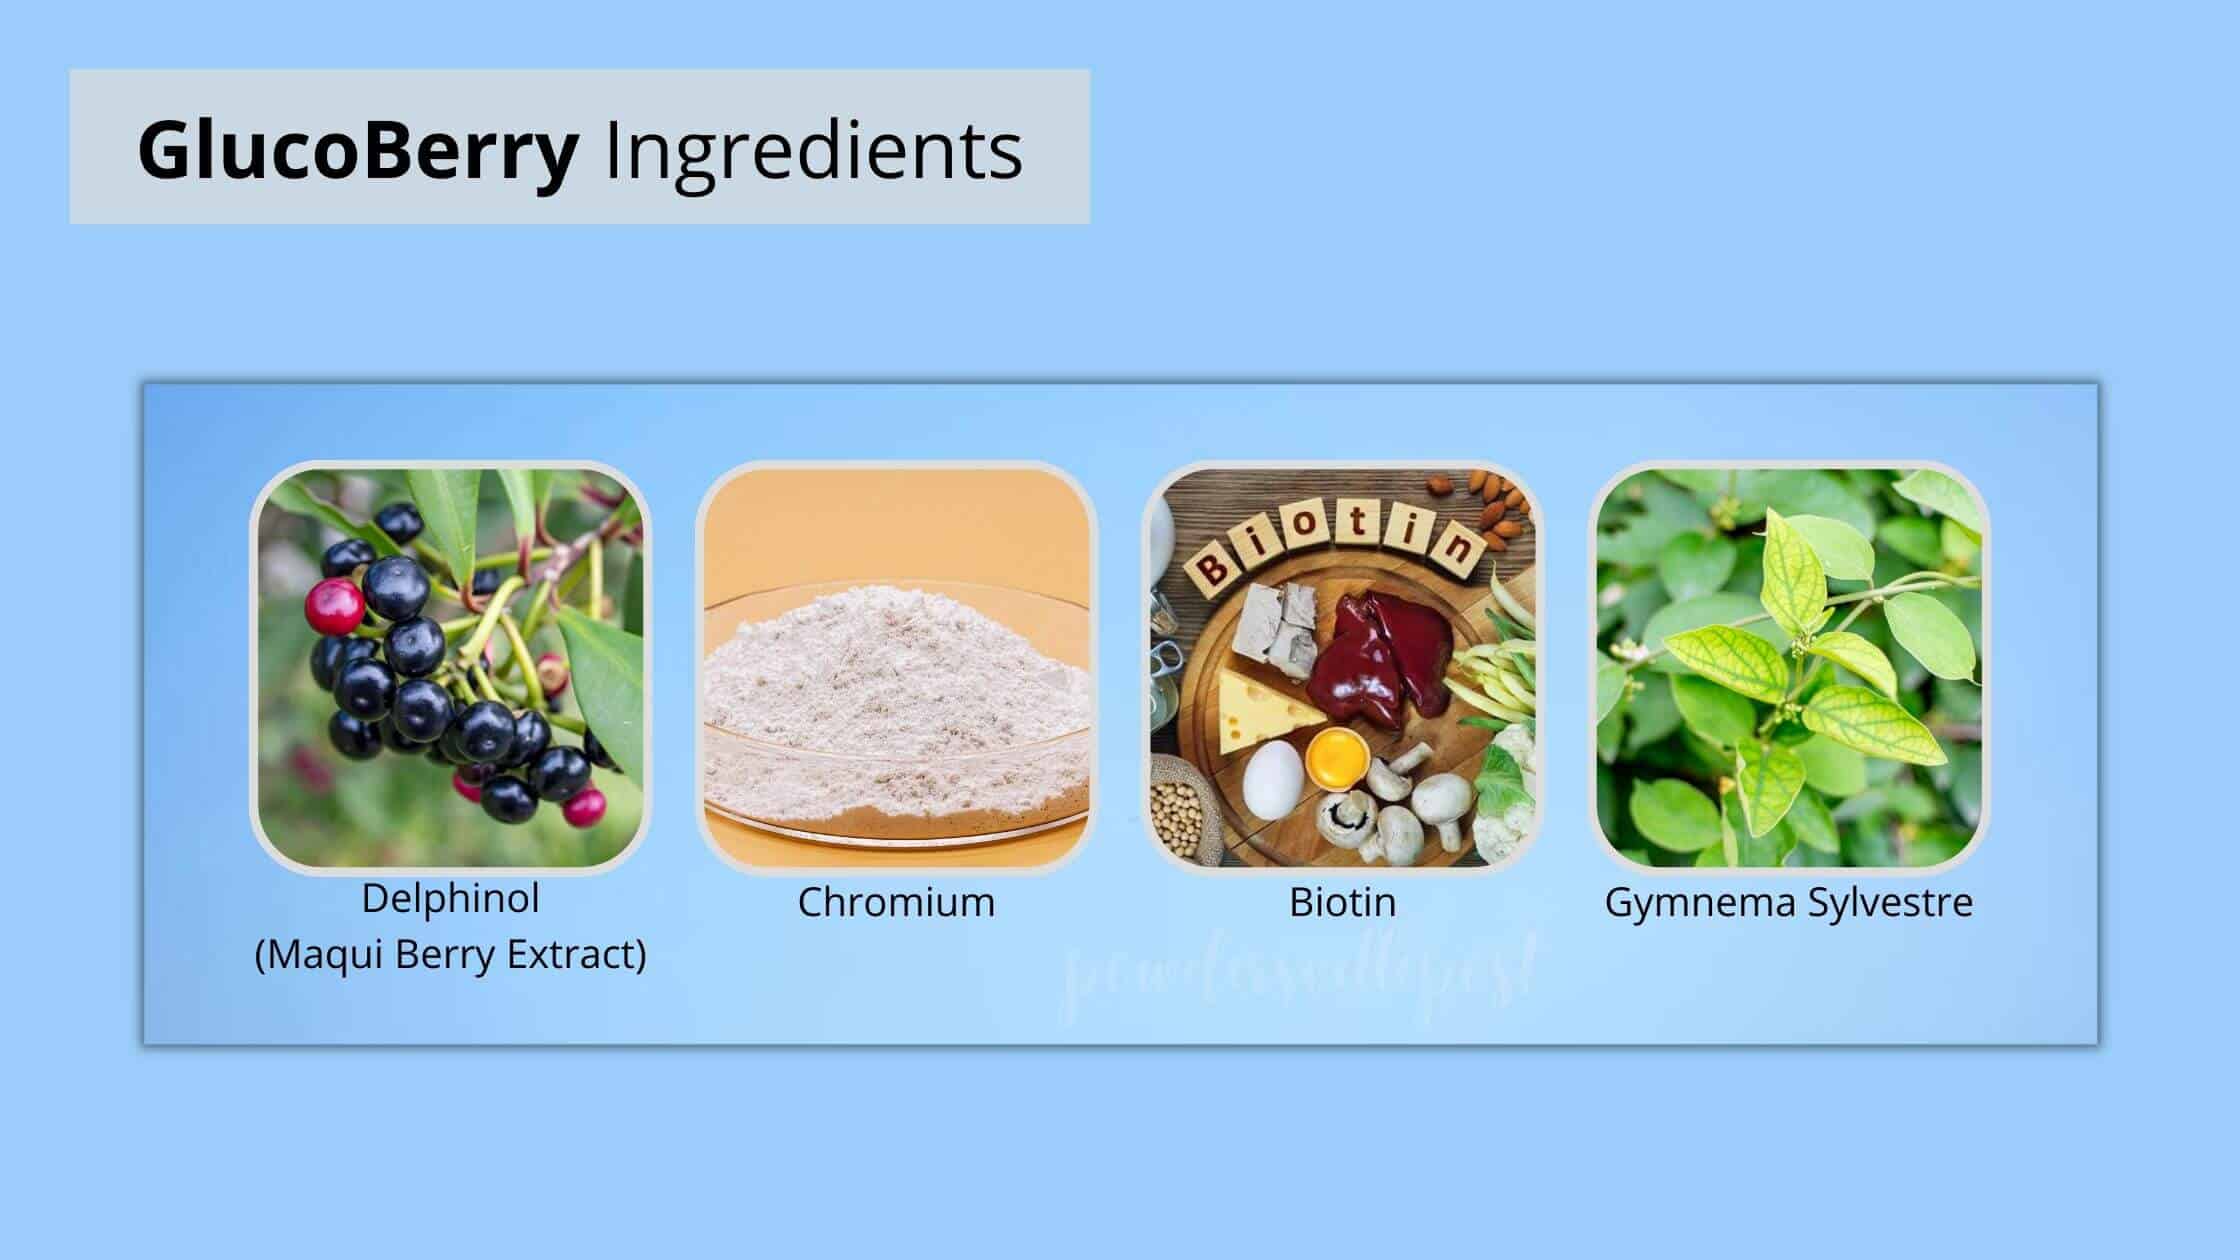 GlucoBerry Ingredients